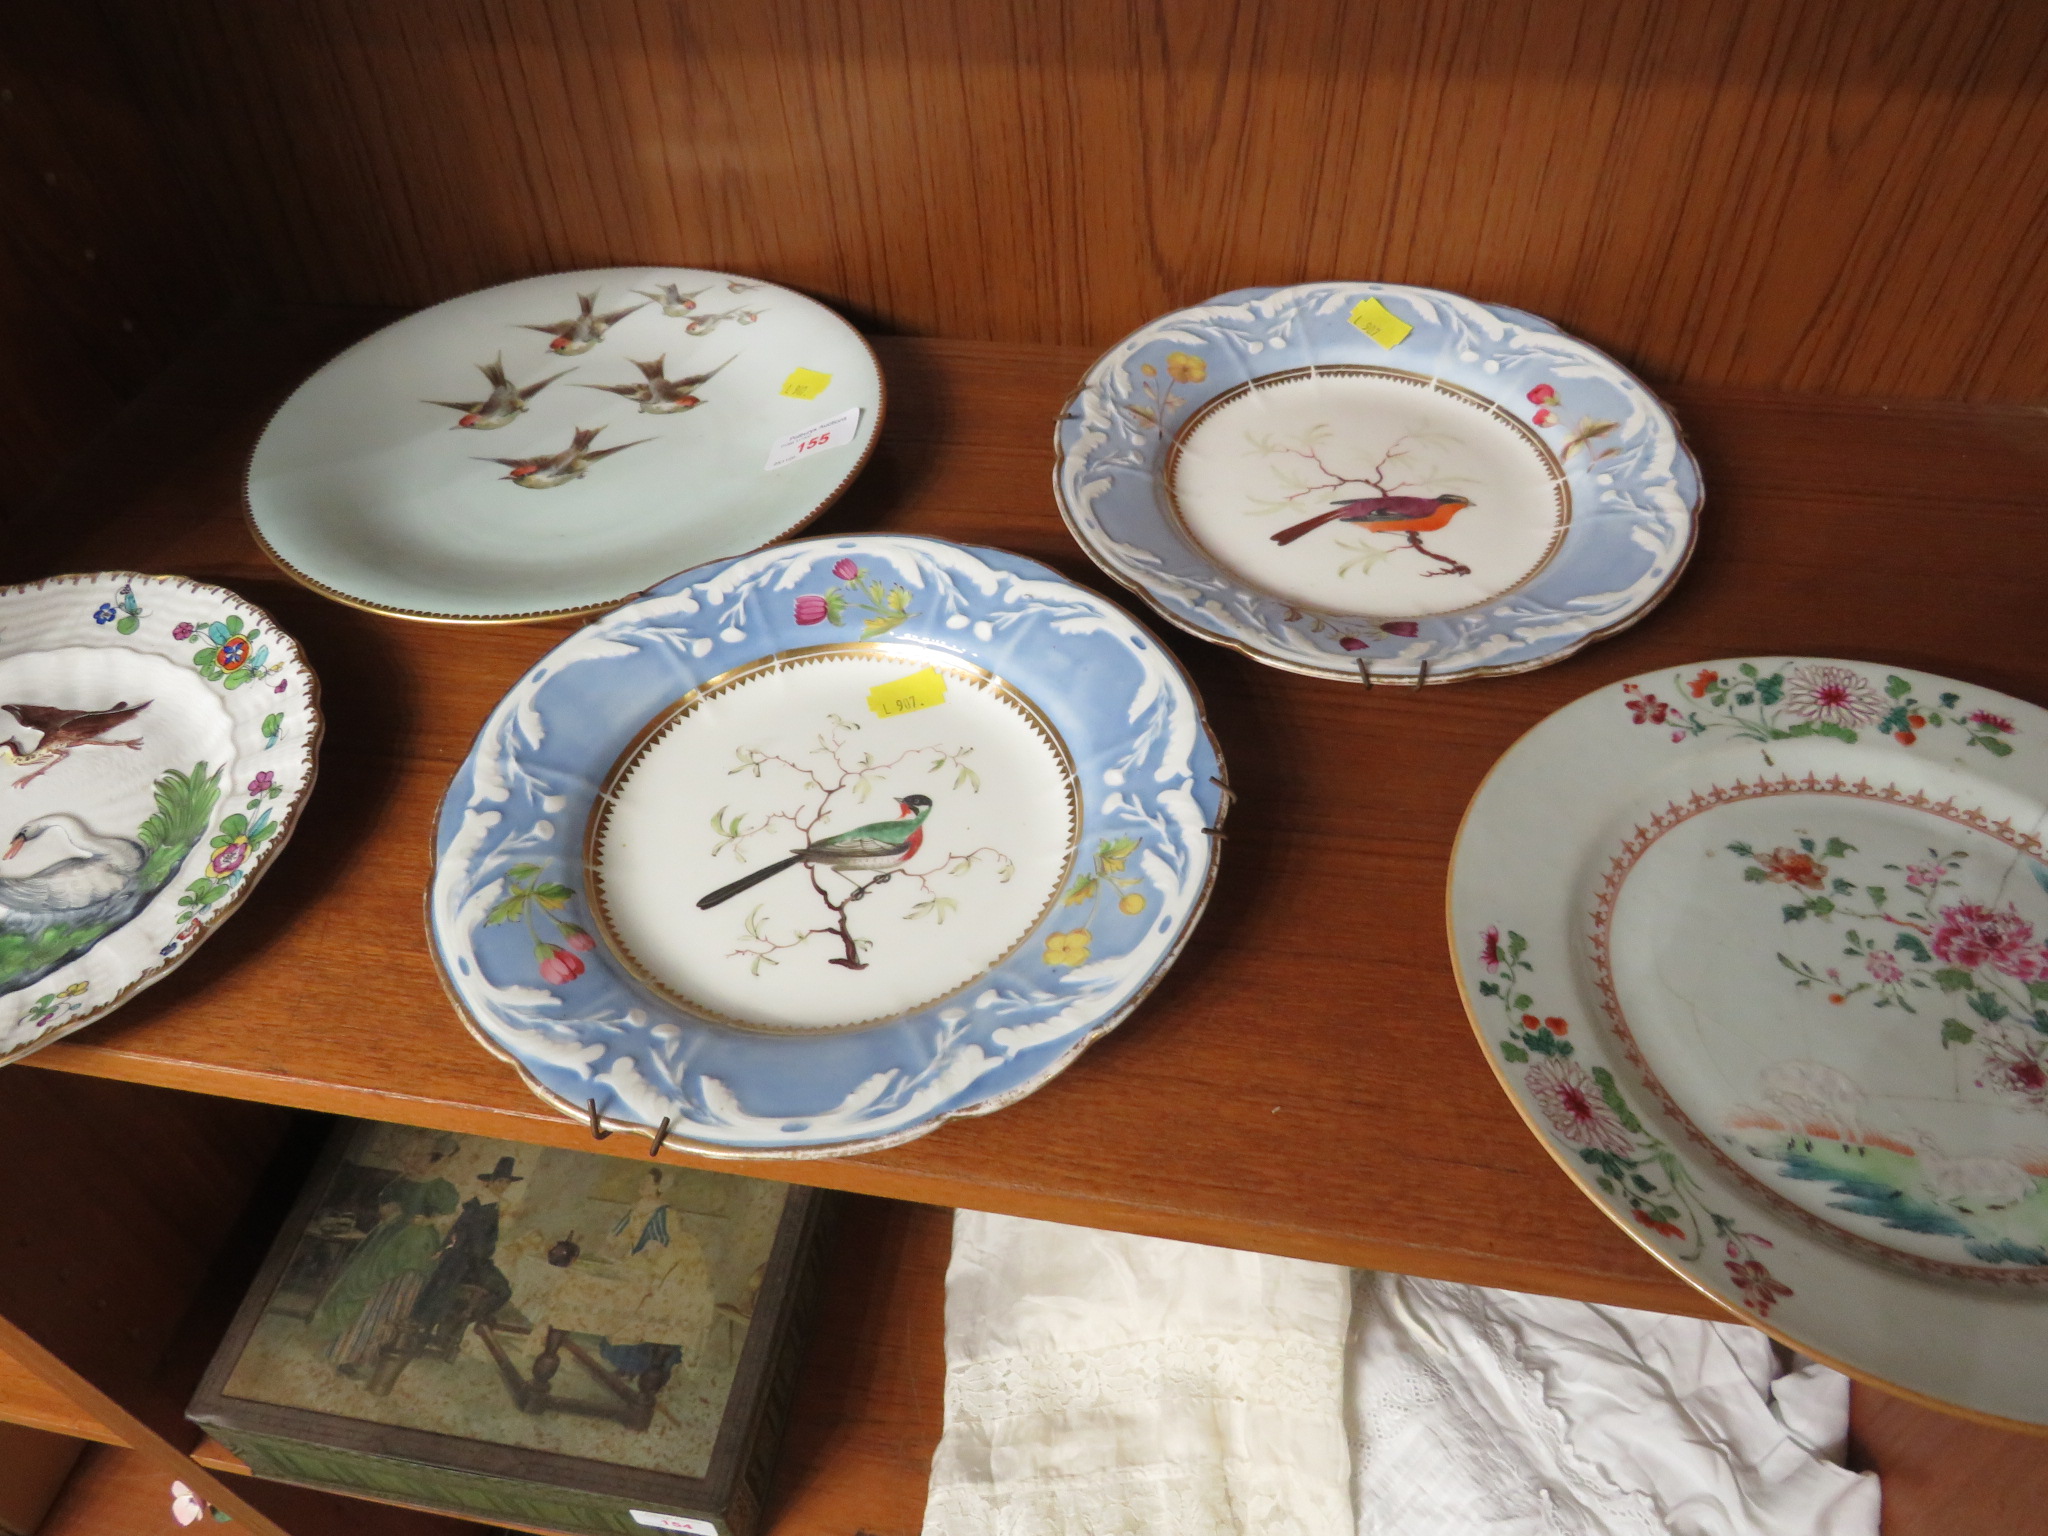 FIVE DECORATIVE PLATES DECORATED WITH HAND-PAINTED BIRDS